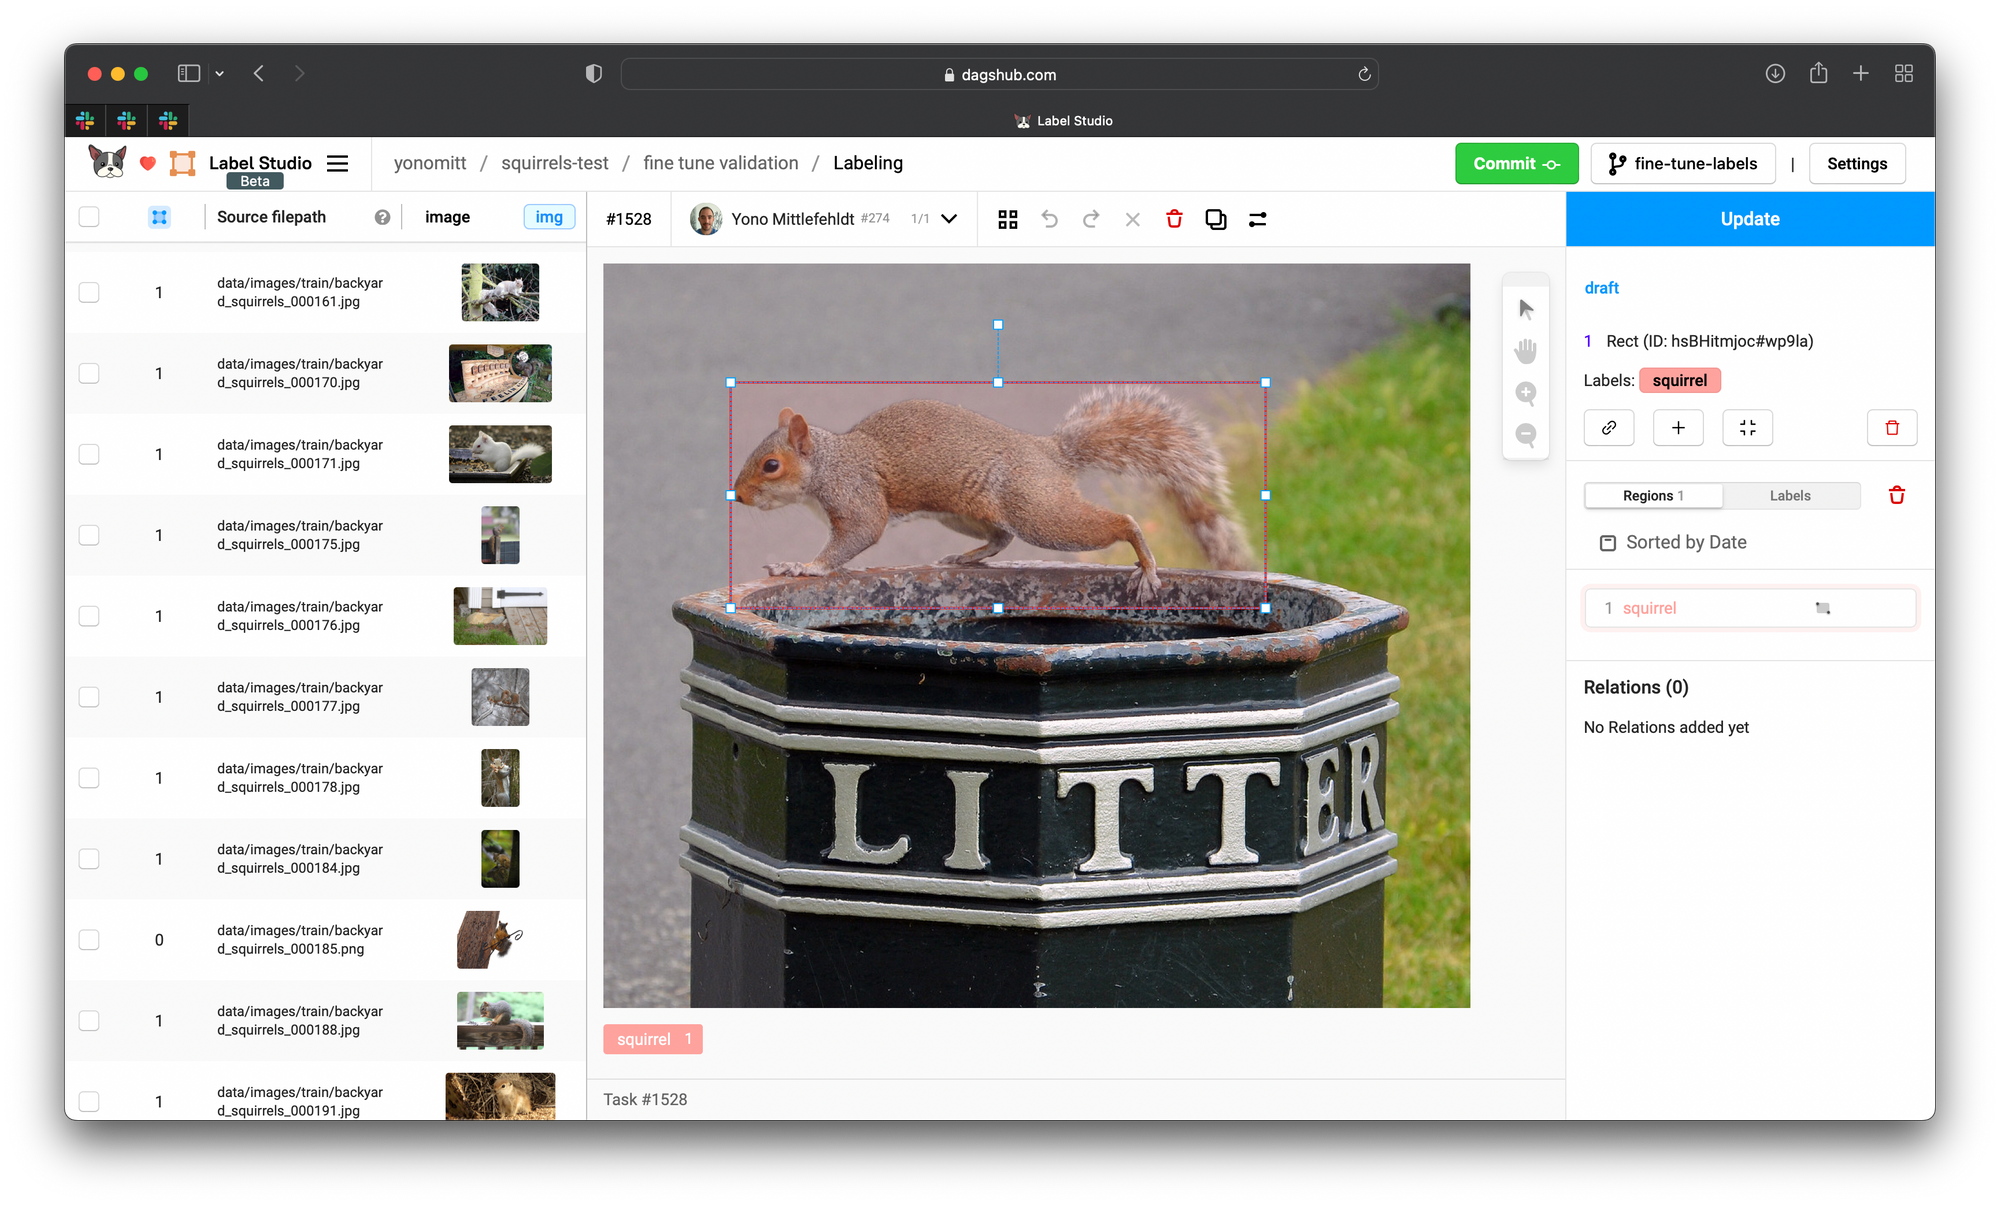 DagsHub's Label Studio integration running in a web browser, showing an image of a squirrel walking on a litter bin, annotated with a bounding box